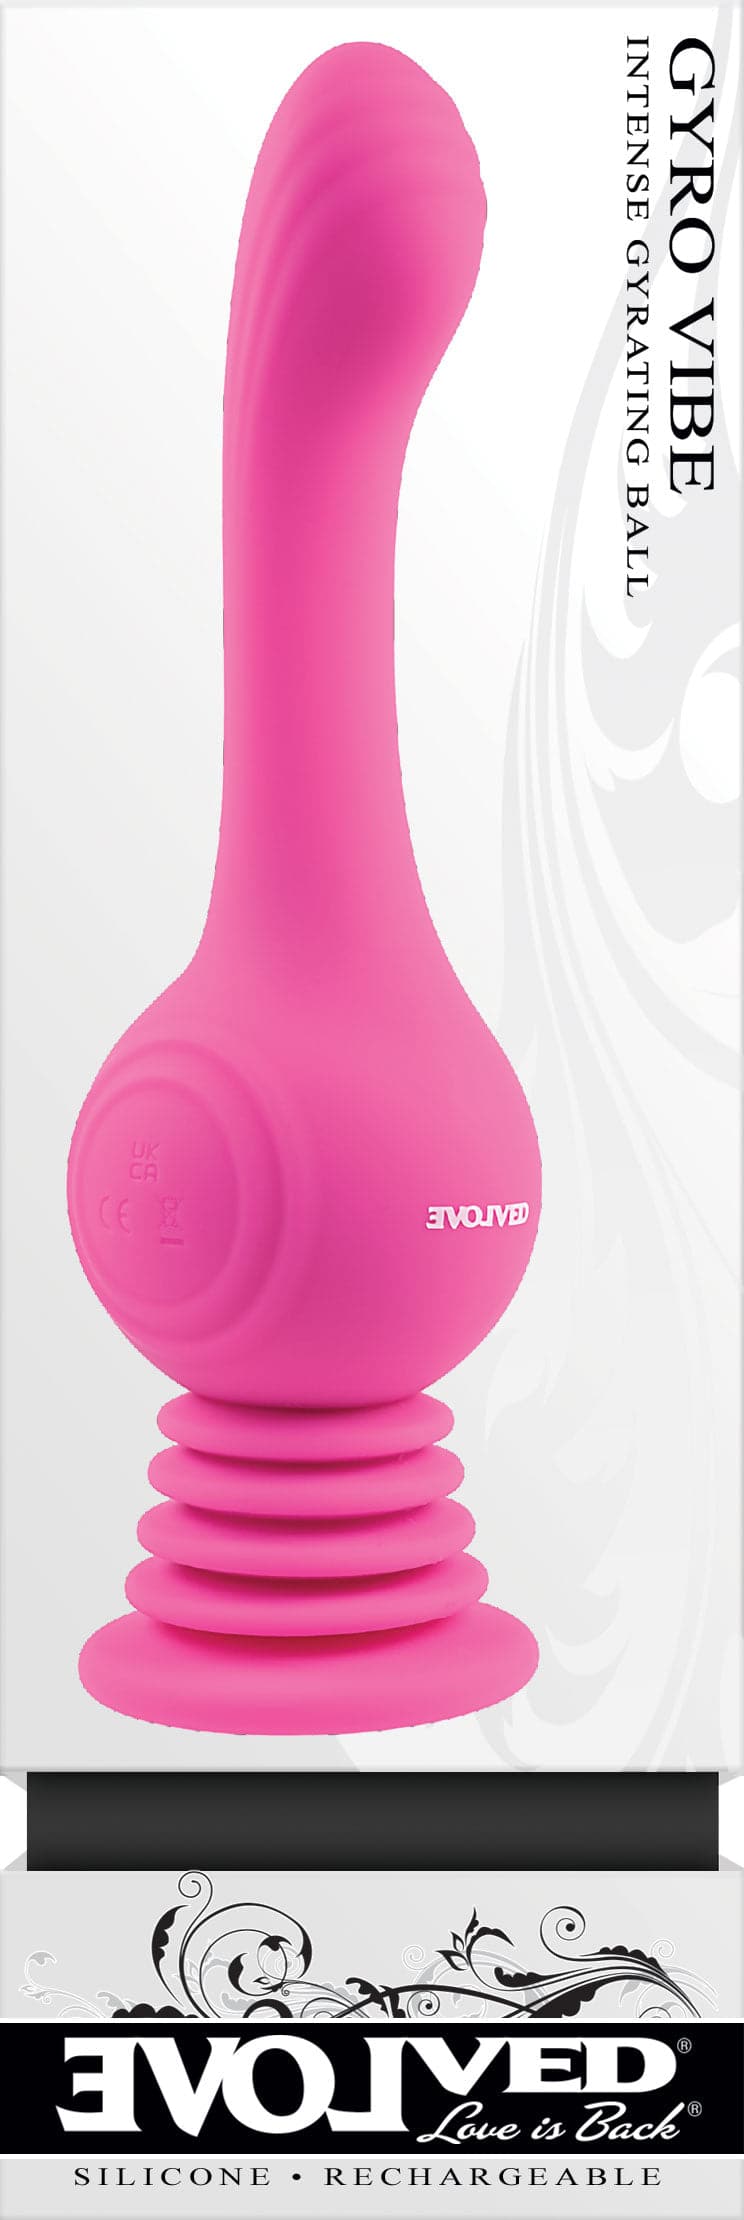 newest sex toys, new sex toys for couples